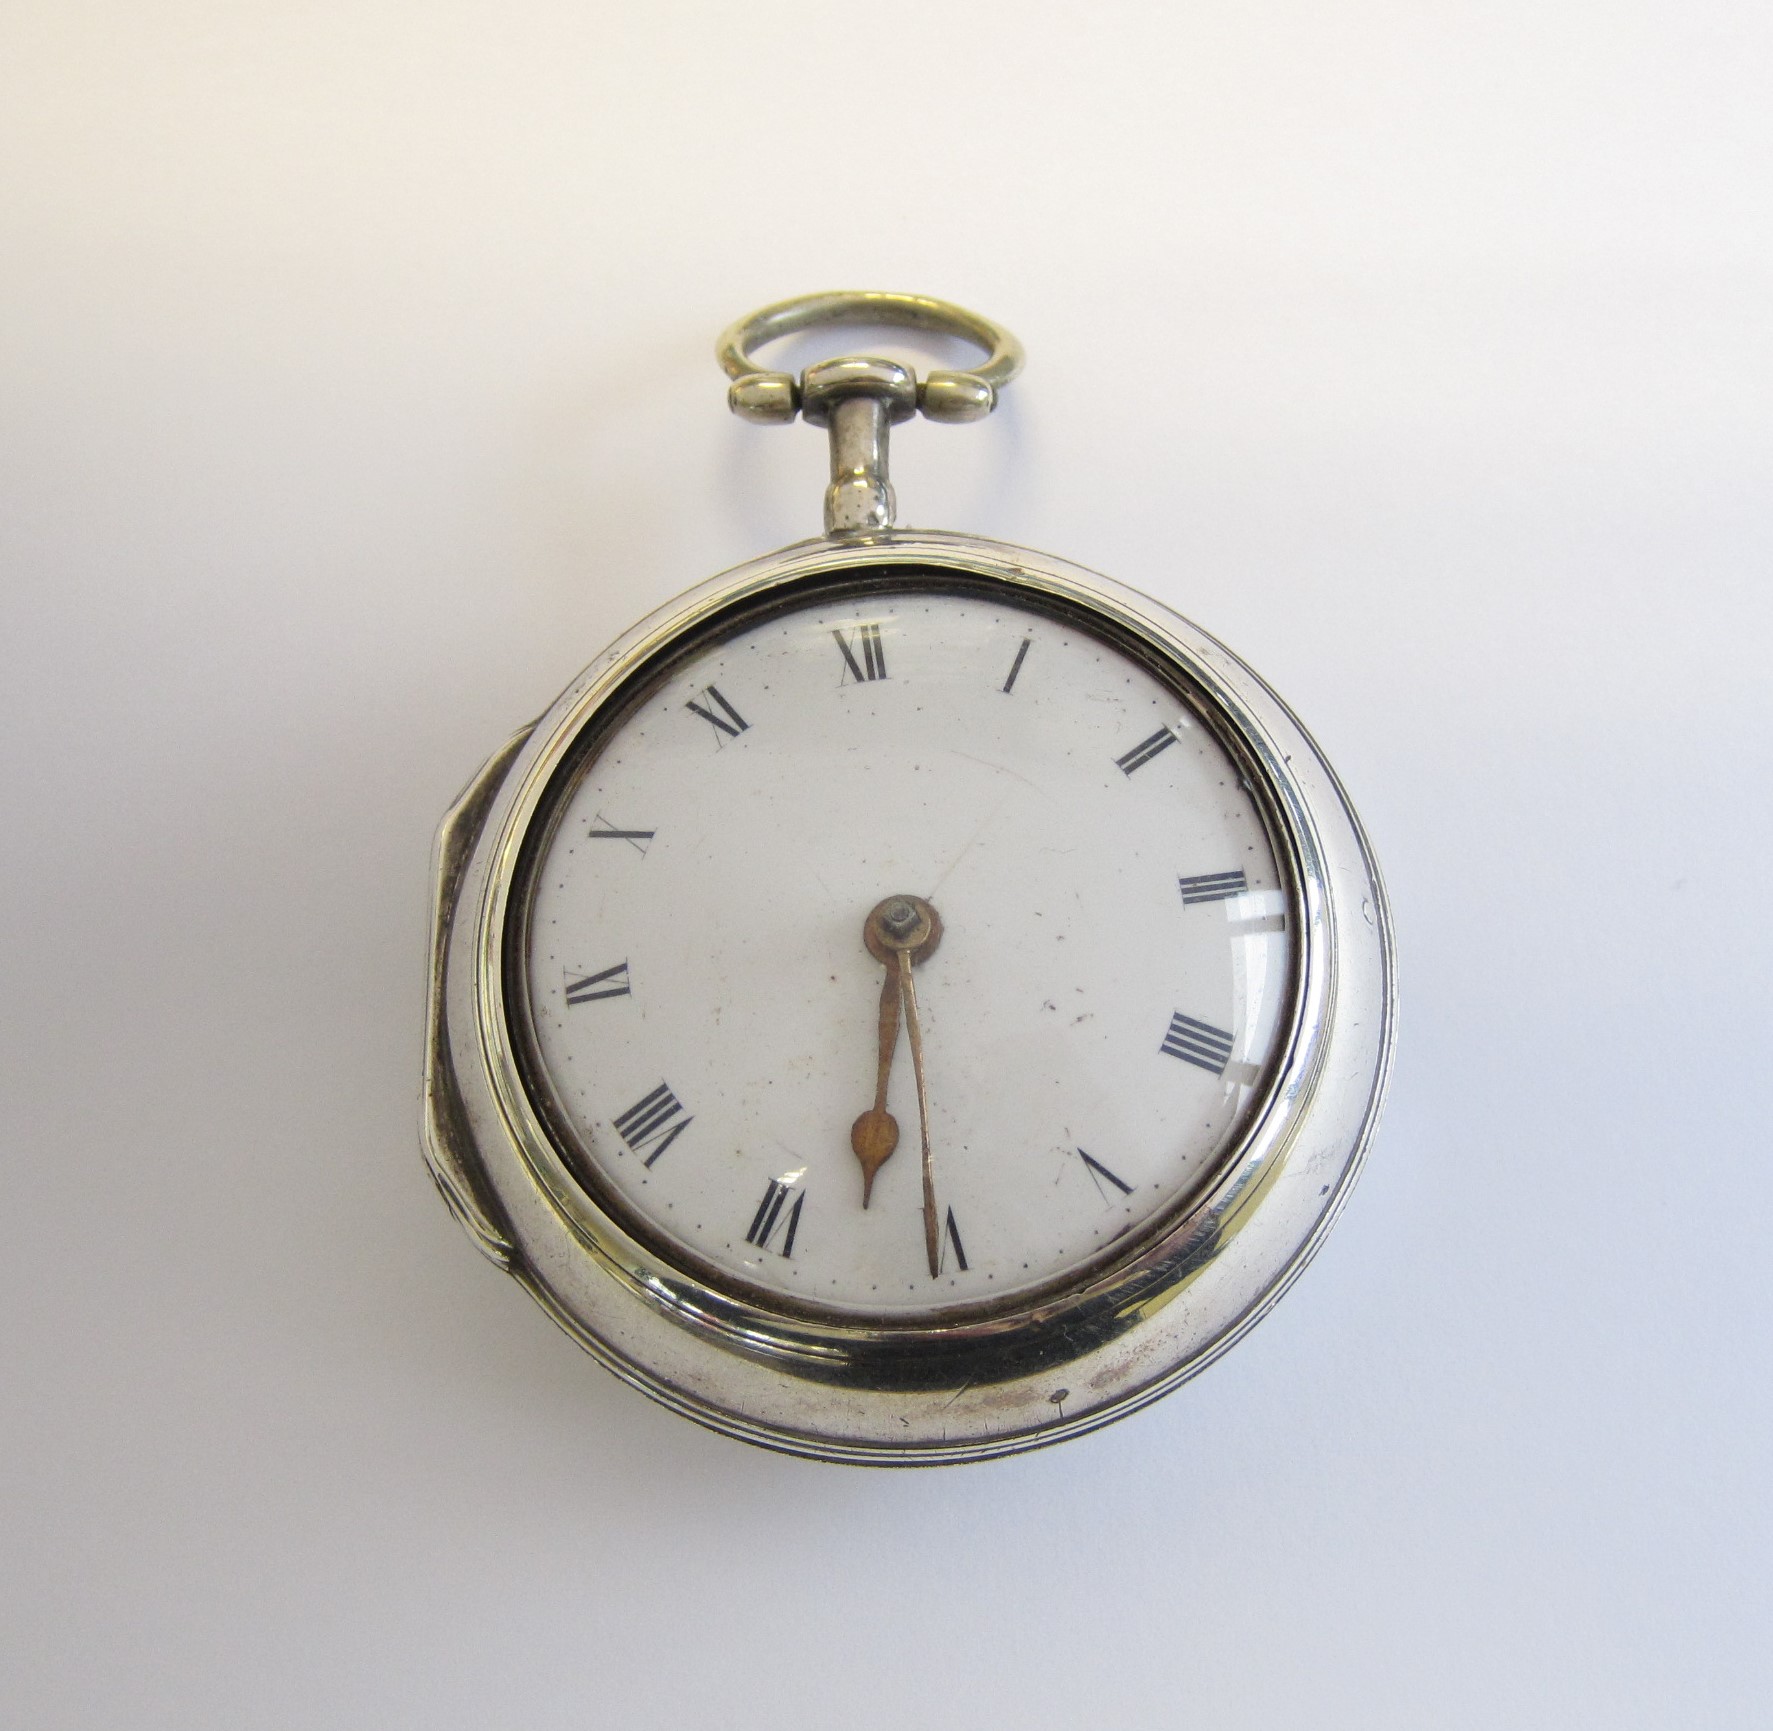 A George III silver pair cased Verge Pocket Watch inscribed Jn Champion, London, No. 8820